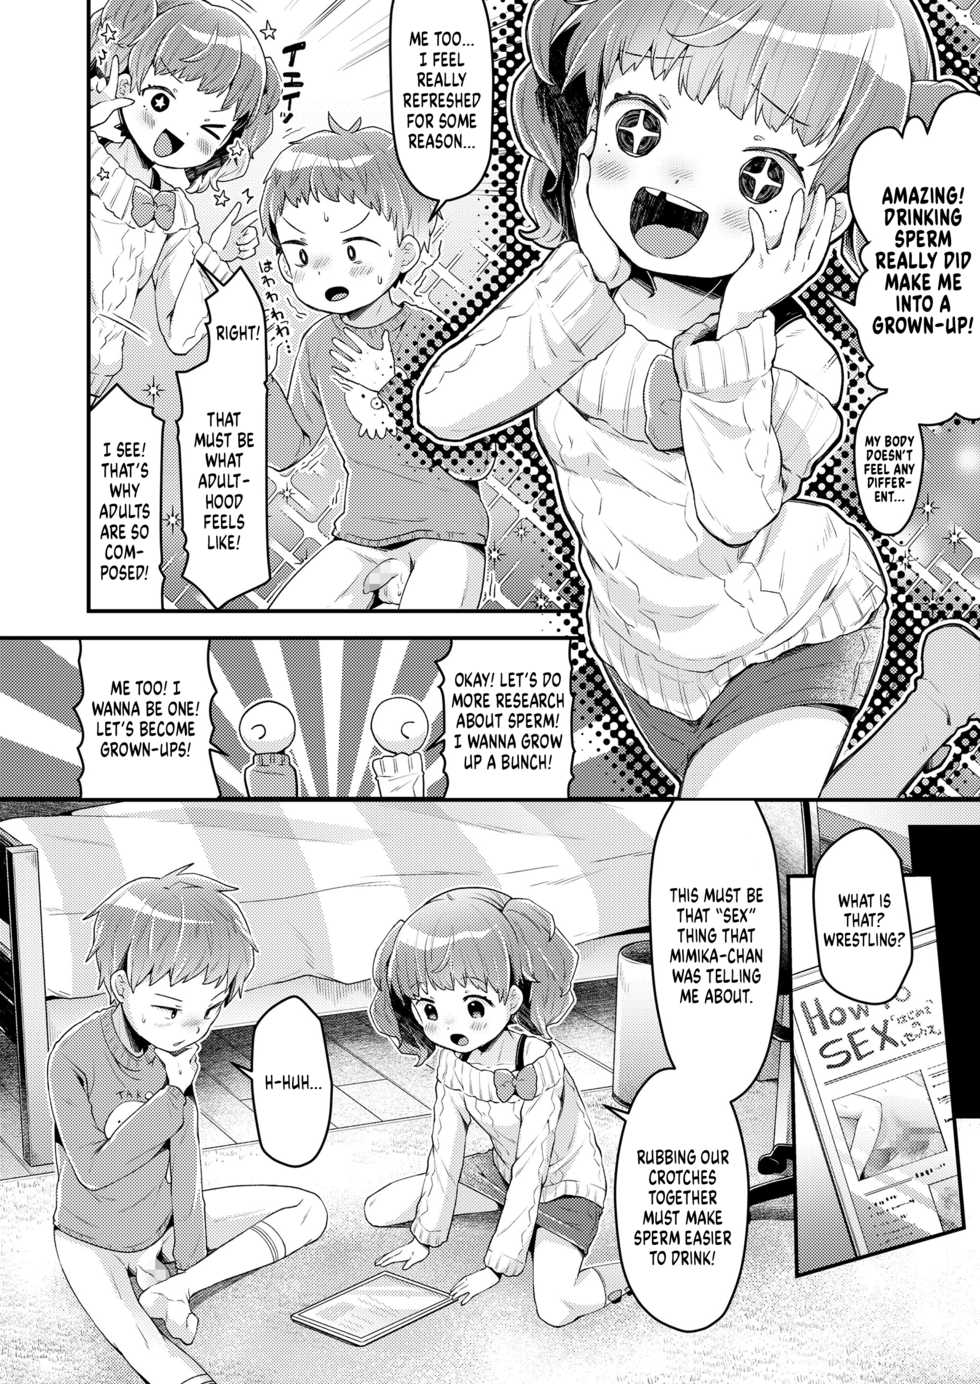 [Neriume] Issho ni Otona Training! | Let's Train to be Adults Together! (COMIC LO 2021-05) [English] [Xzosk] [Digital] - Page 10